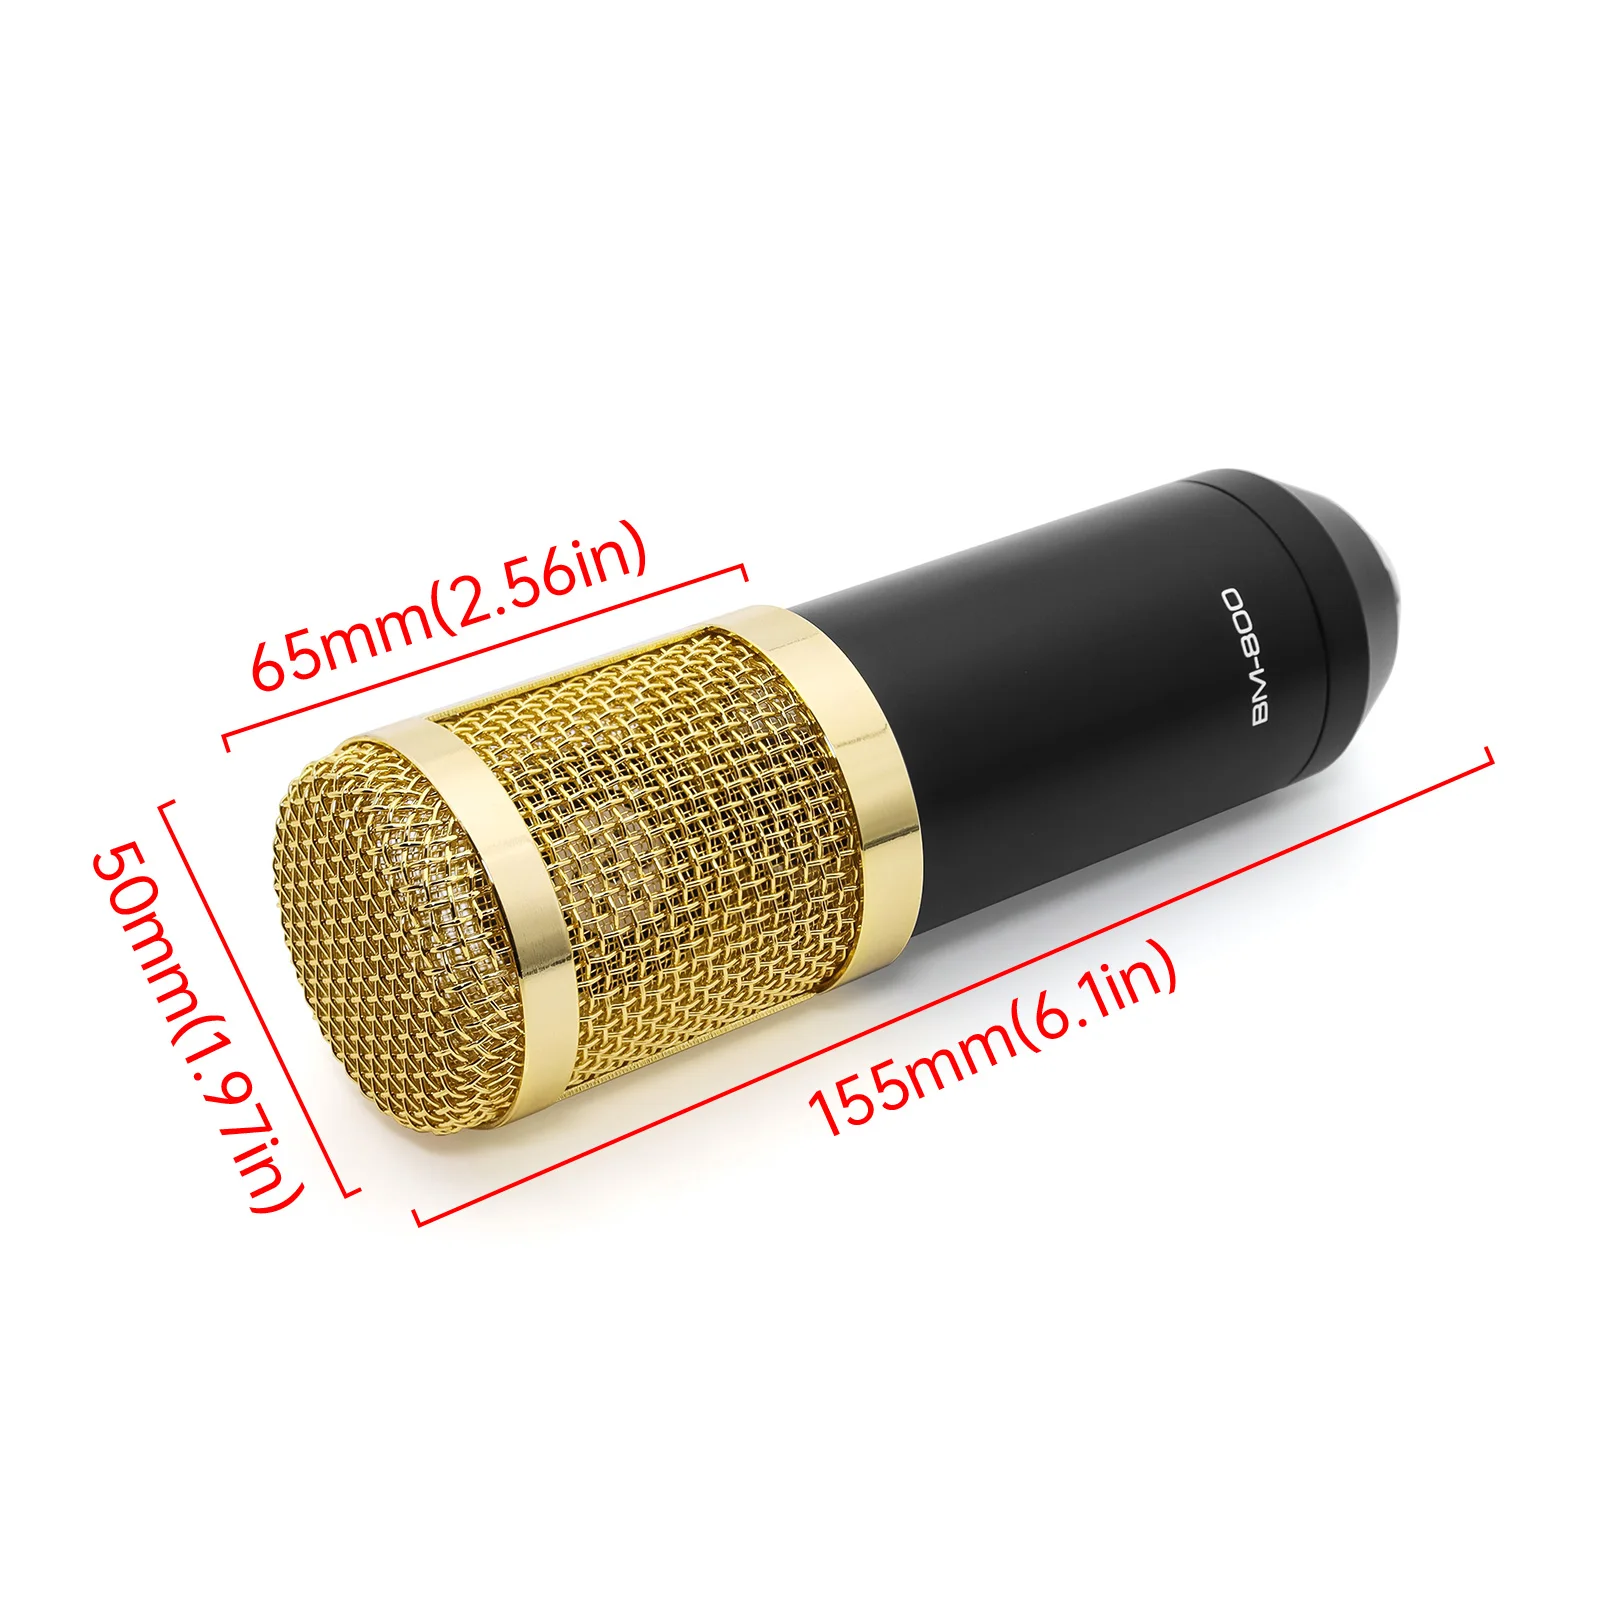 BM 800 Professional Microphone BM800 Mic Studio Condenser Microphone for Karaoke Podcast Recording Live Streaming Microphone images - 6